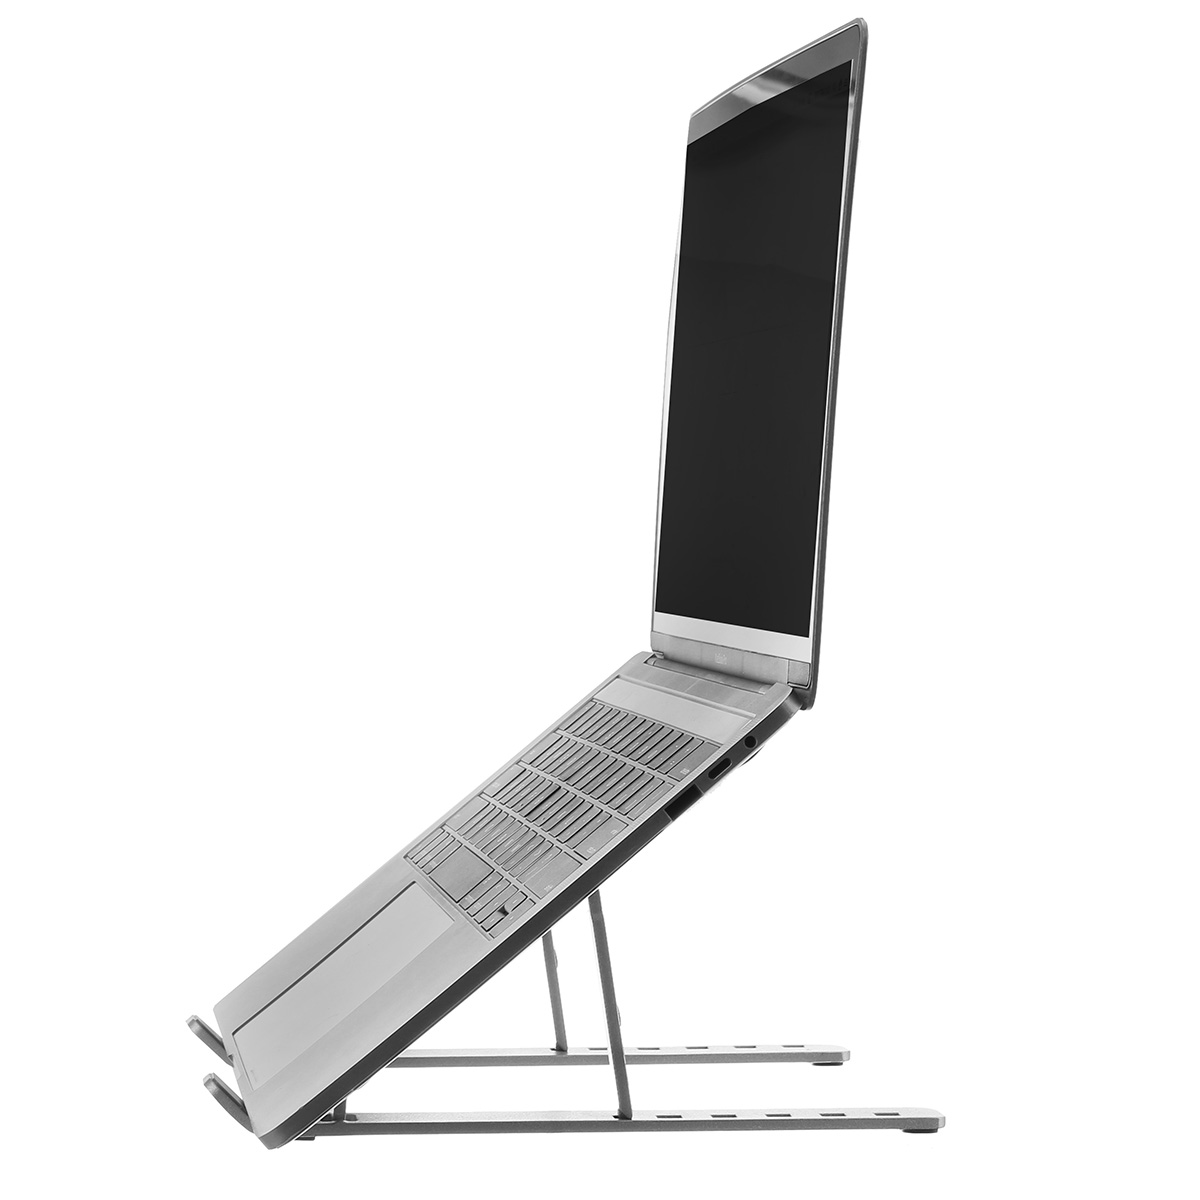 Folding-Laptop-Stand-Computer-Rack-Cooling-Pad-Portable-Support-Base-Desktop-Lifting-Radiator-for-No-1743452-10